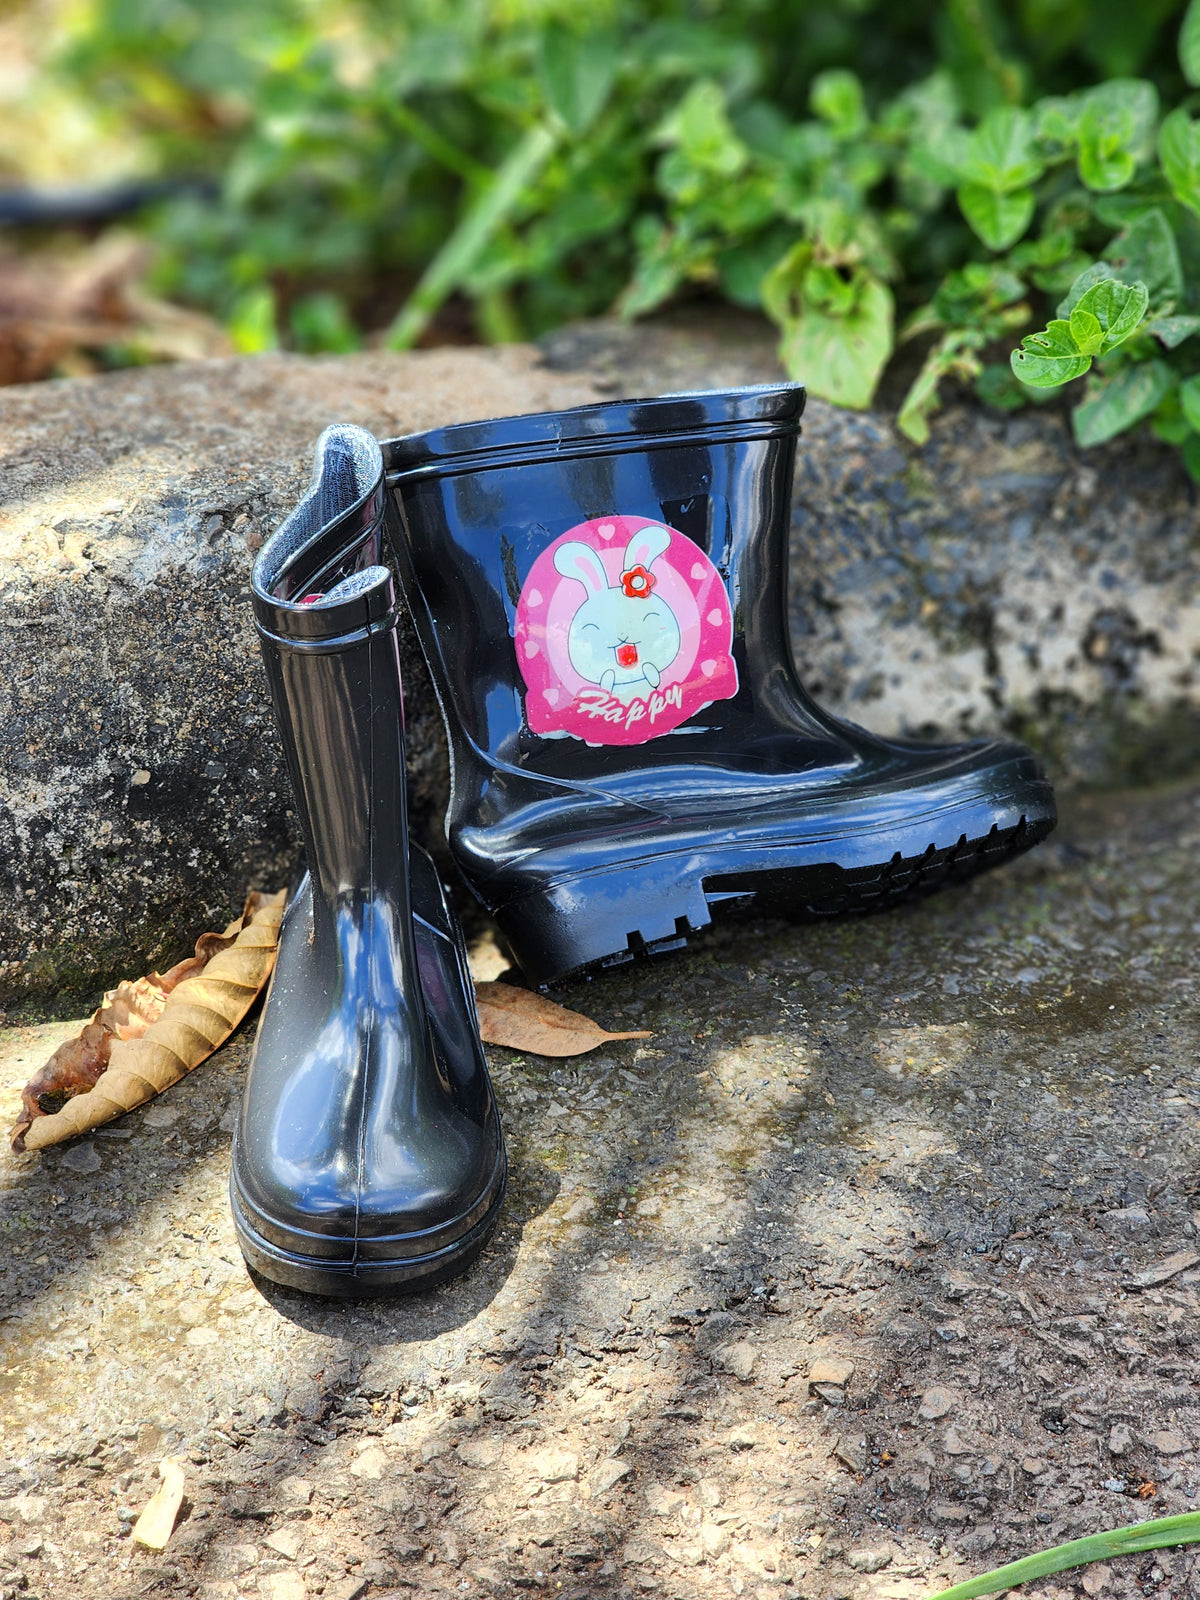 Toddler Kids Adorable Lightwight Waterproof Rain Boots Light Up by Steps